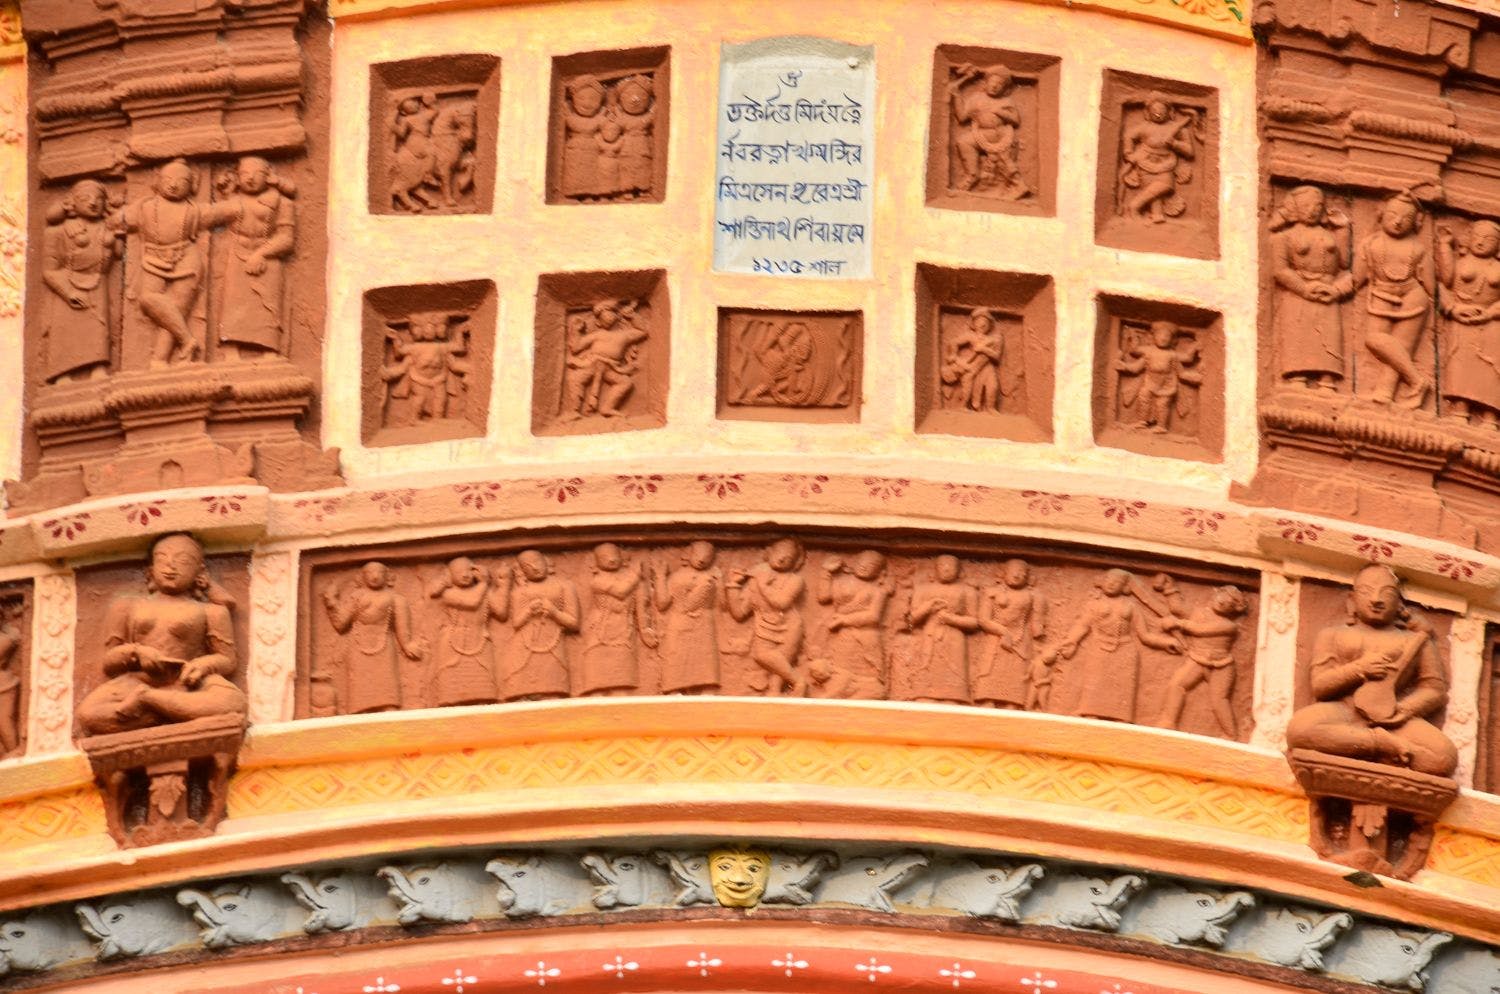 Shantinath Temple at Mitrasenpur, foundation stone and terracotta plaques